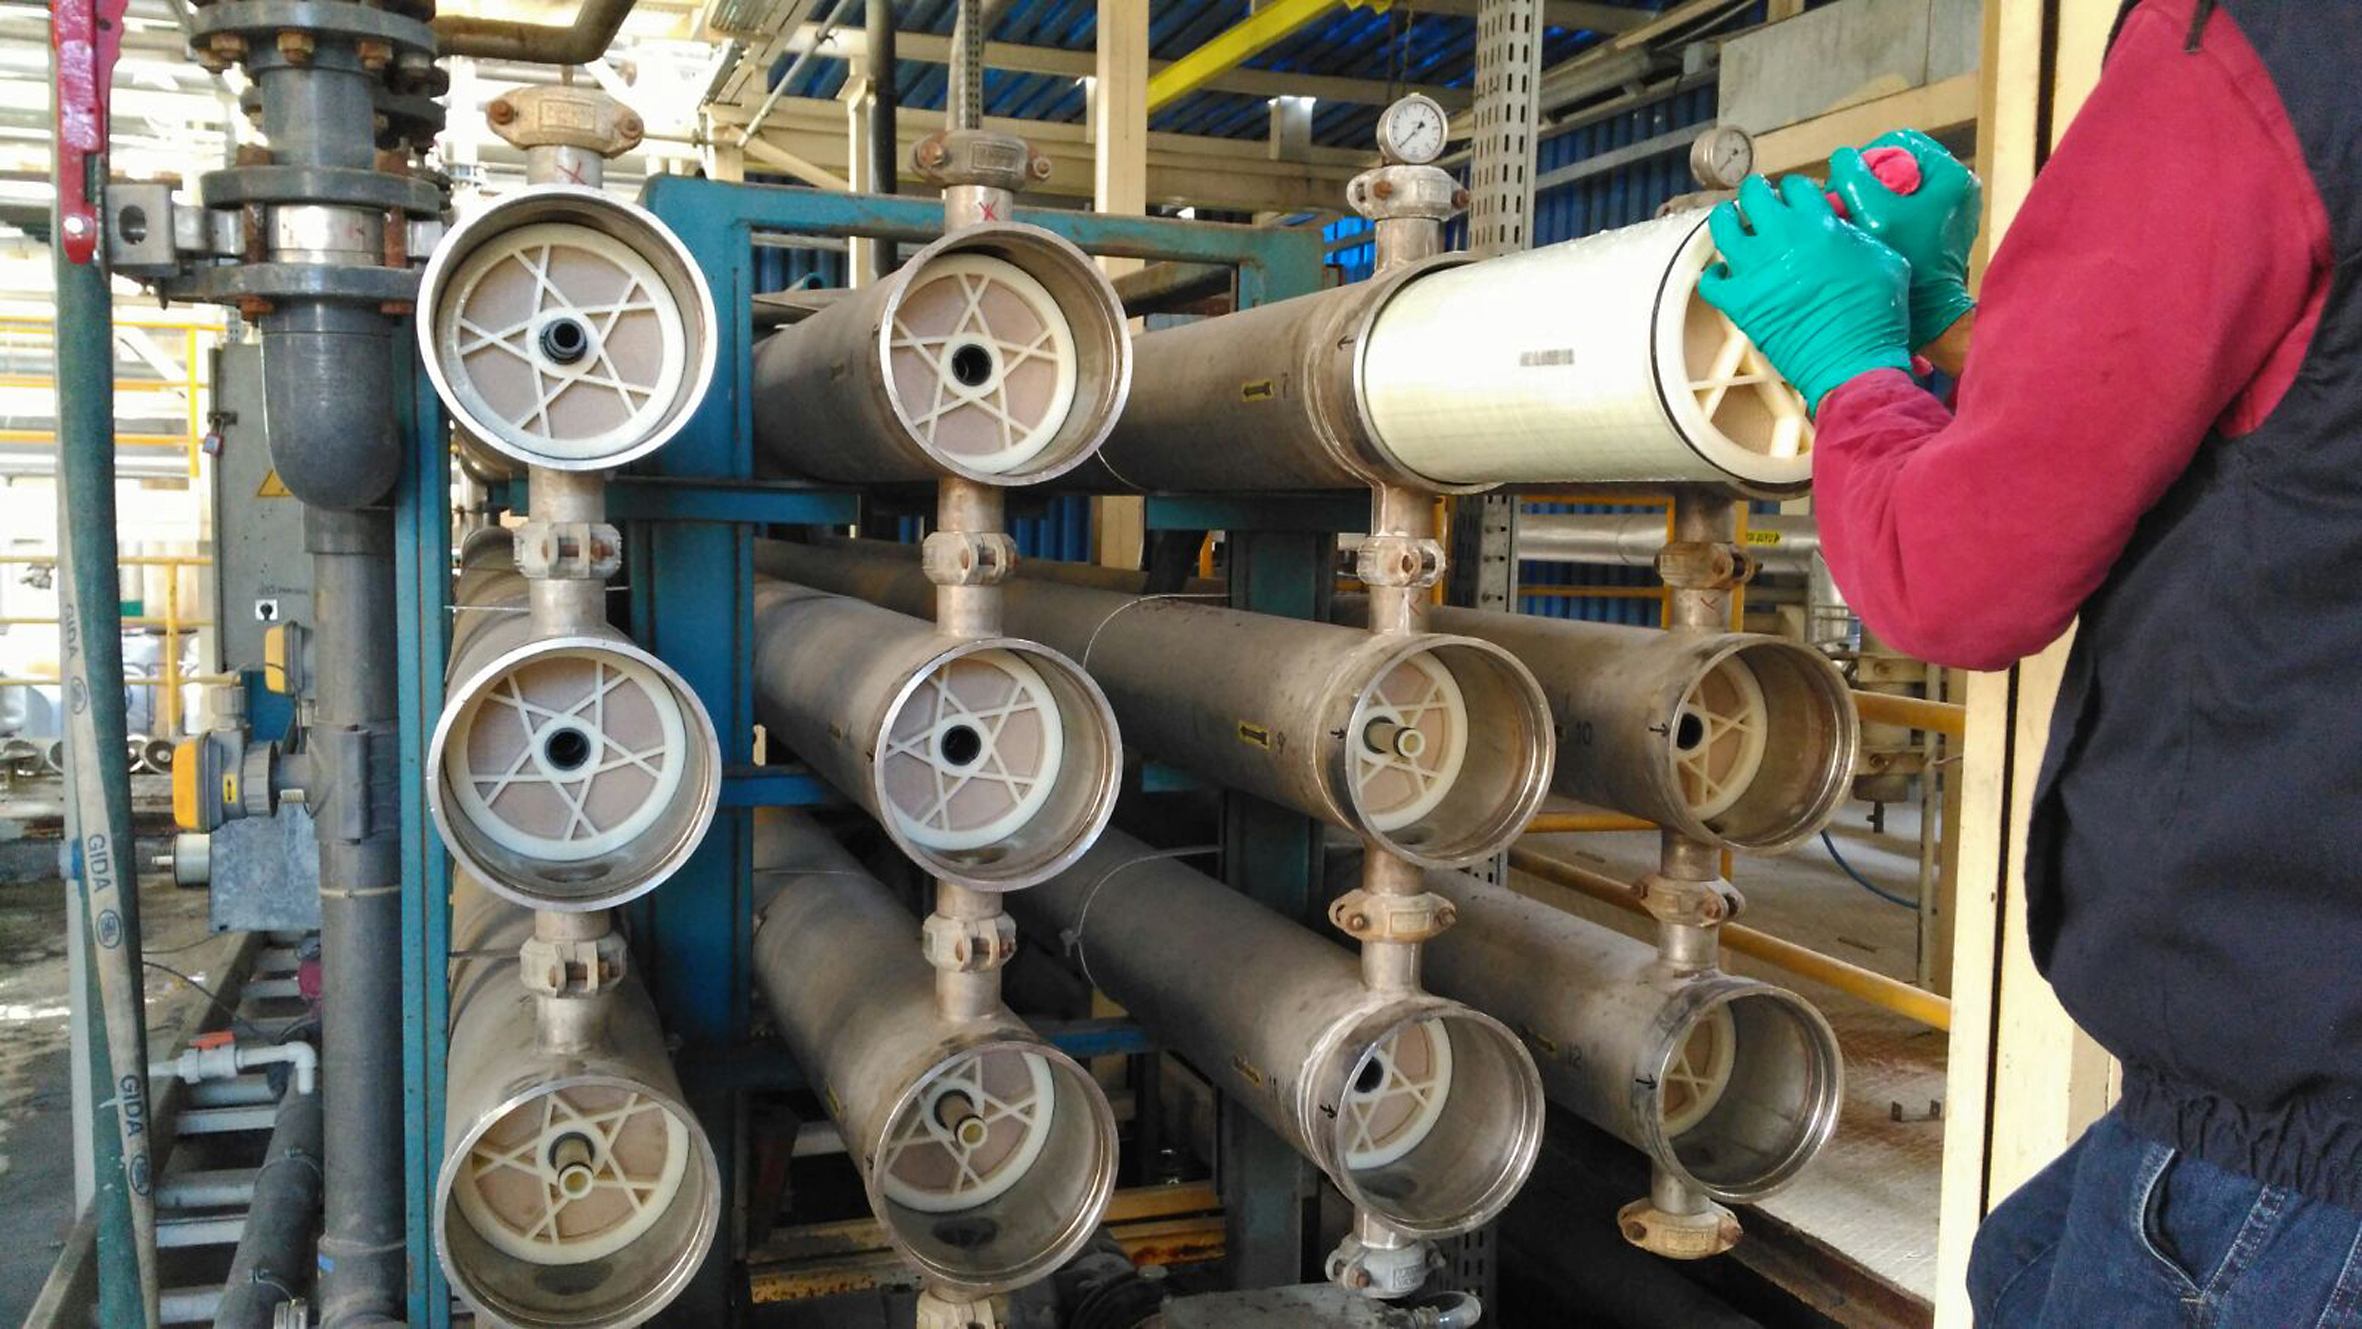 Pressure vessels in a reverse osmosis unit in Turkey are loaded with Lewabrane RO membrane elements from Lanxess. Photo: Burkut.